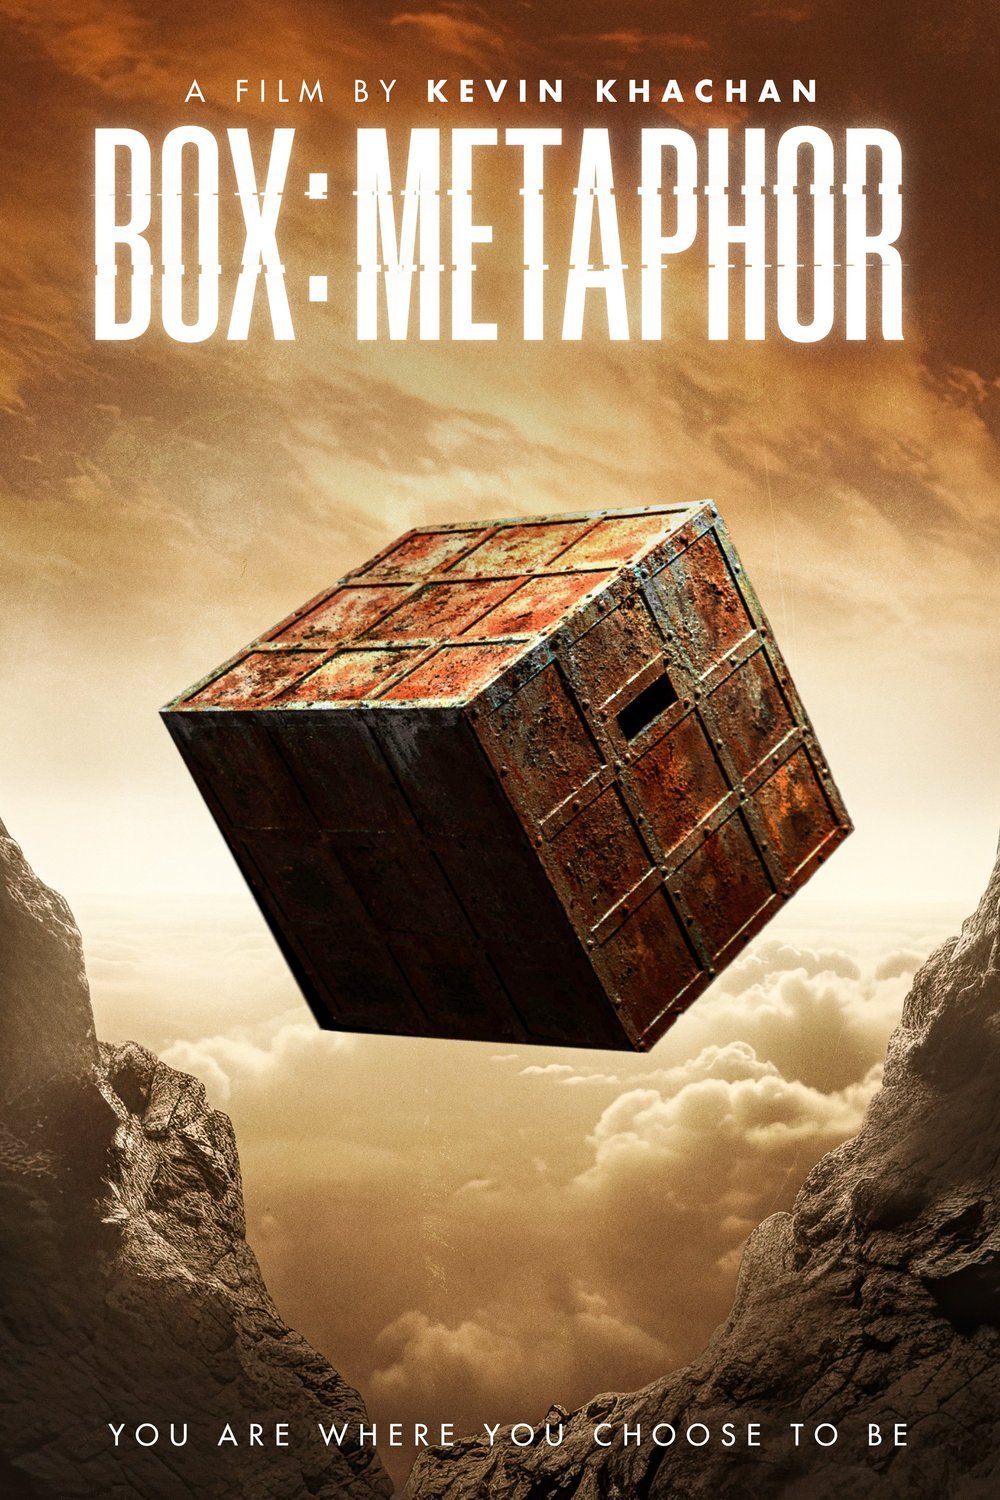 Poster of the movie Box: Metaphor